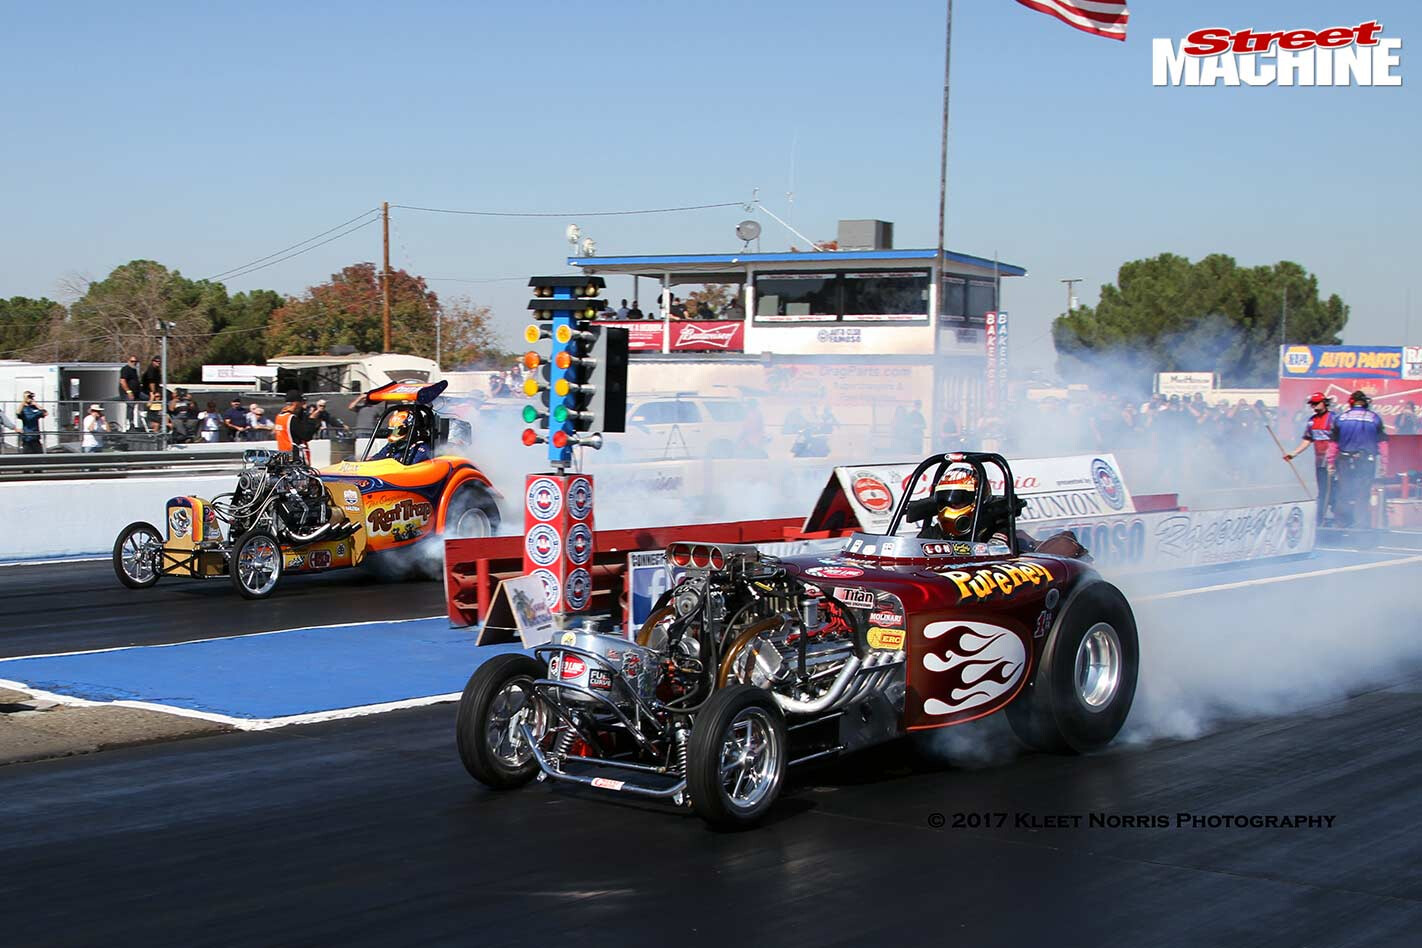 Pure Hell dragster